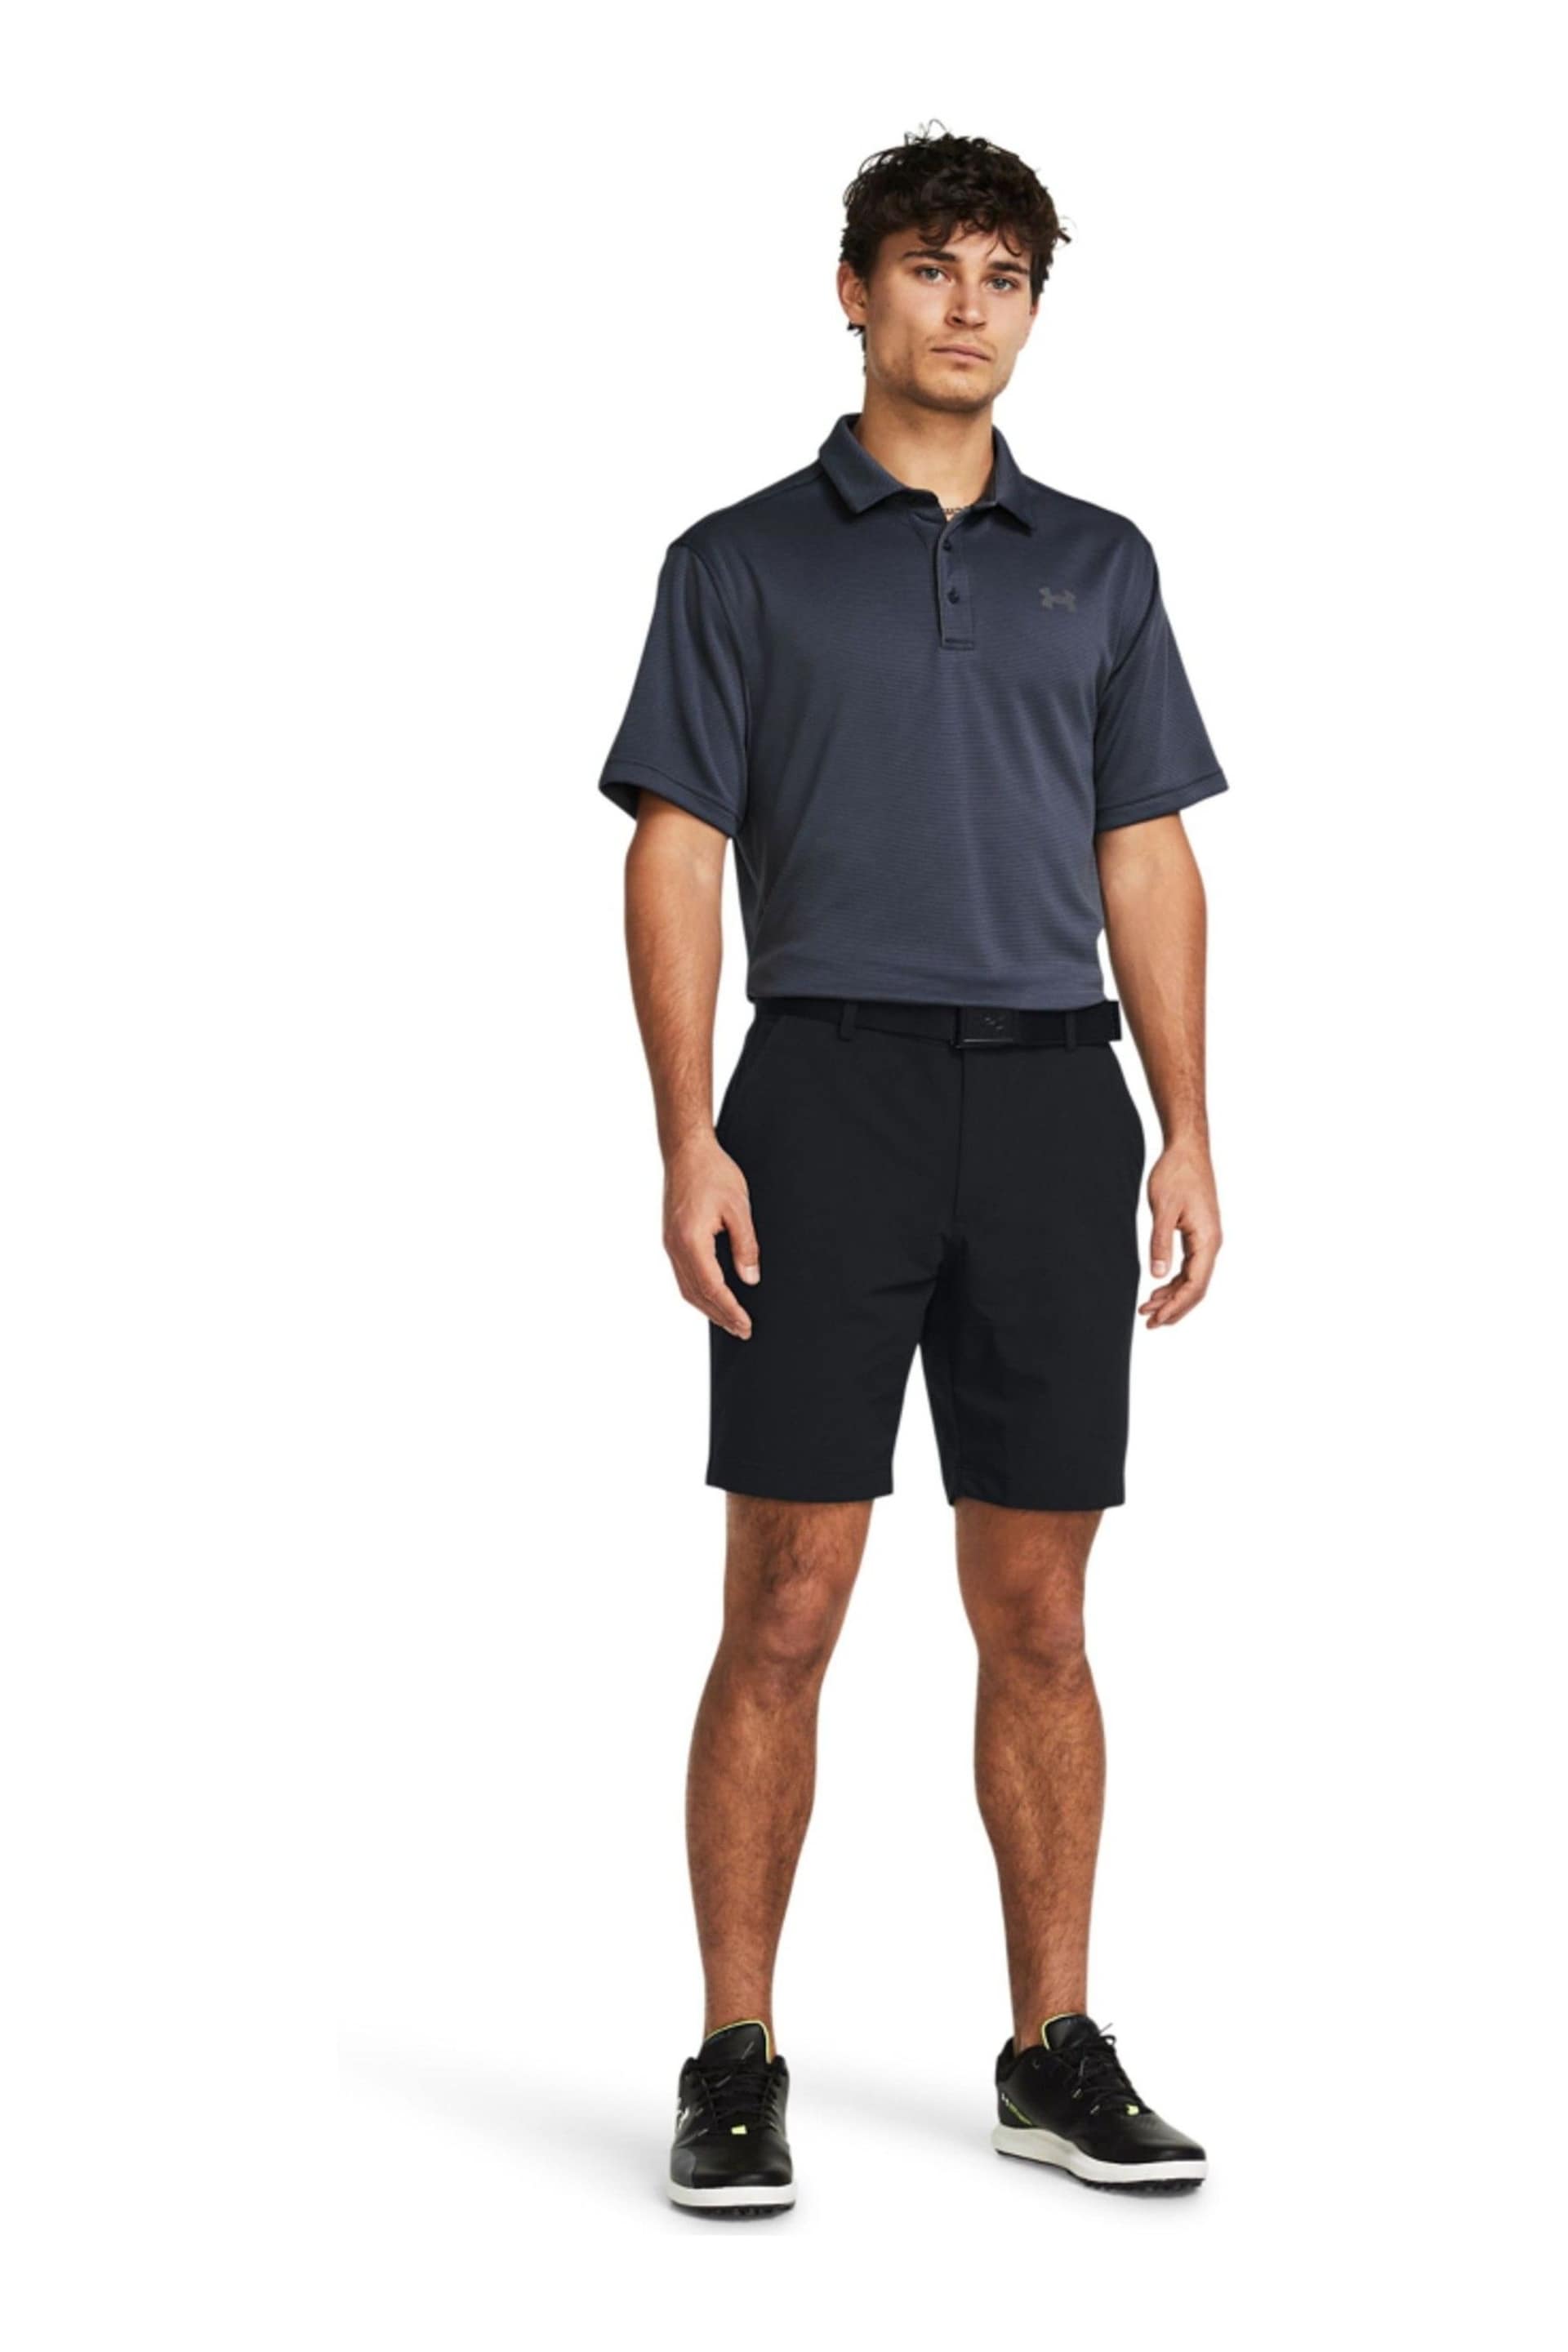 Under Armour Black Tech Taper Shorts - Image 3 of 6